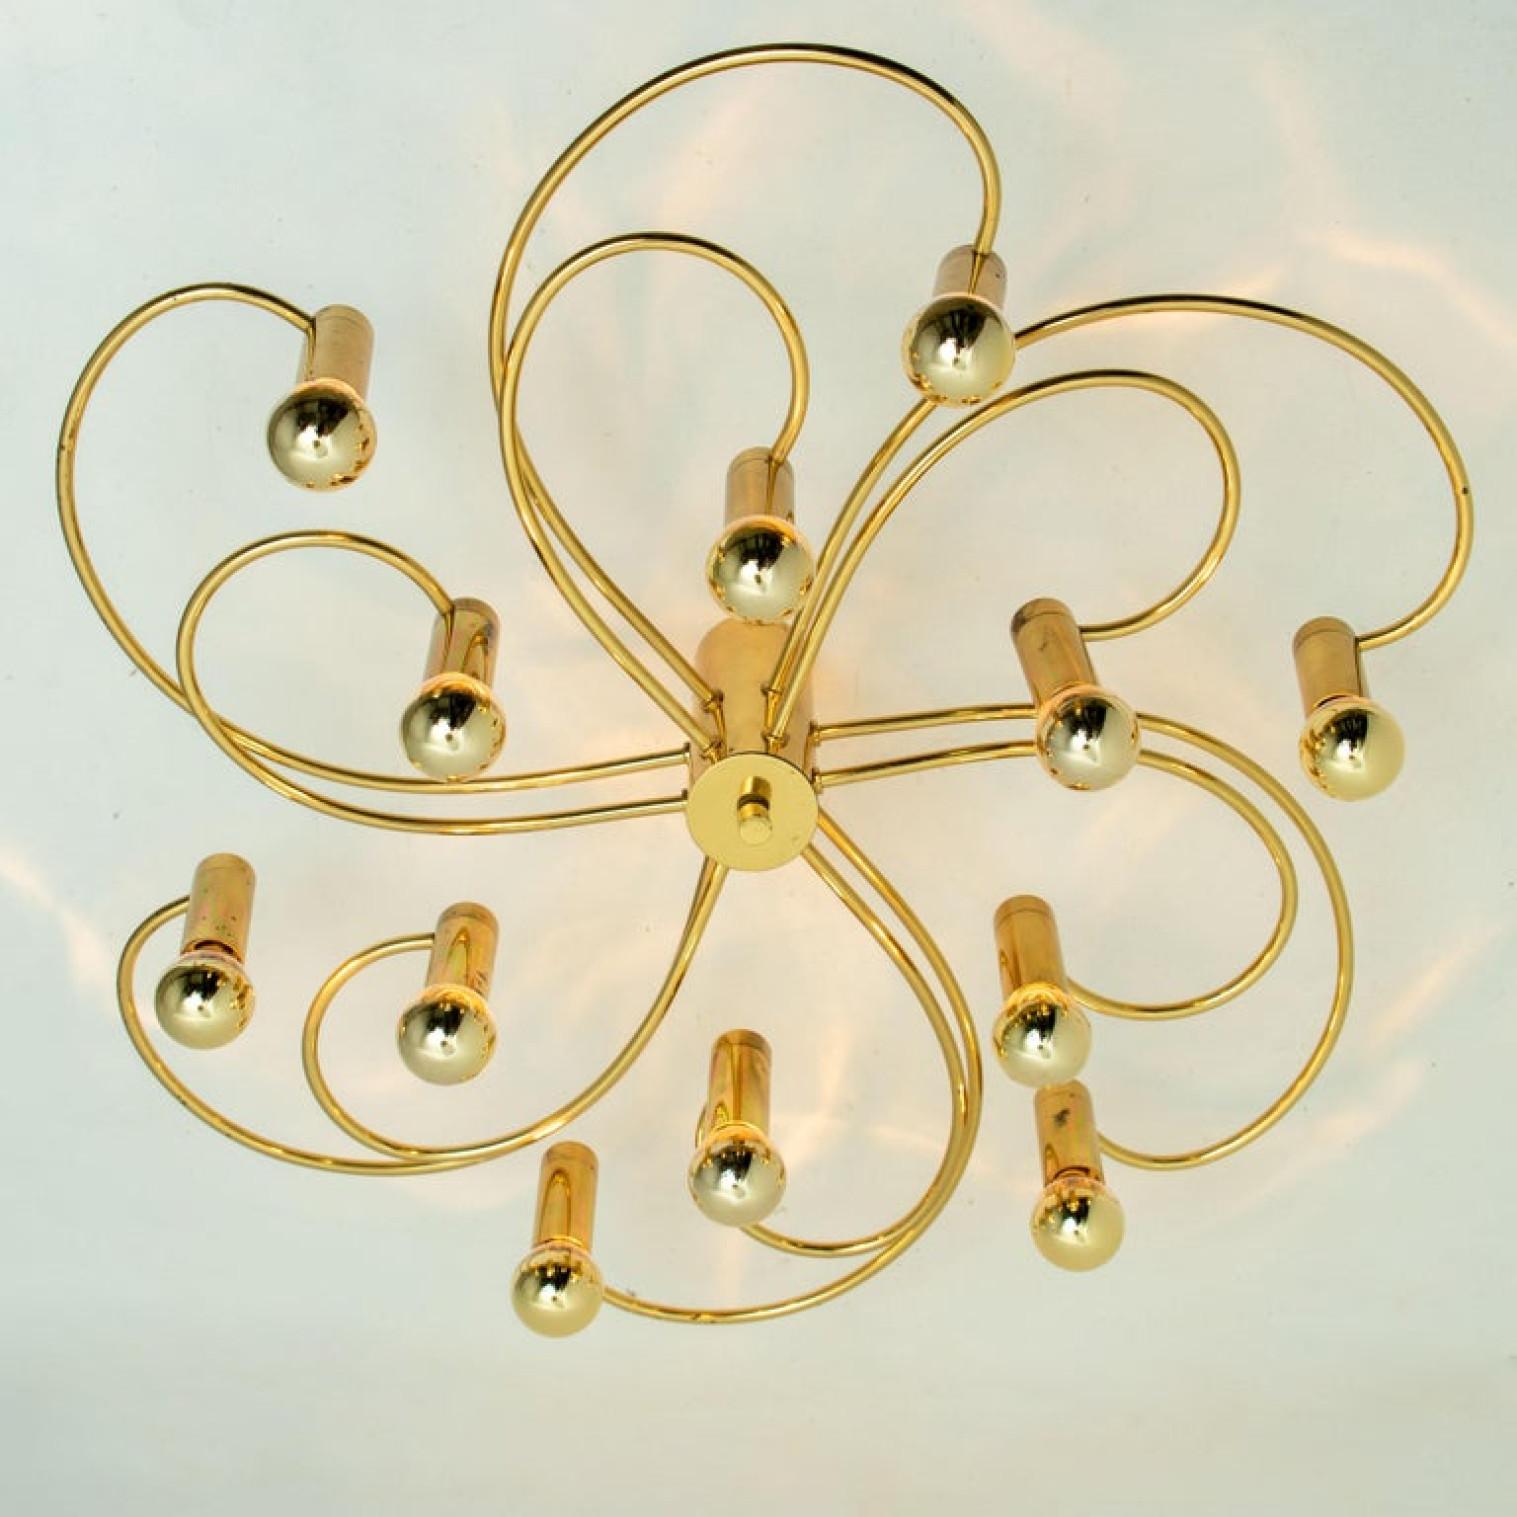 Other Pair of Leola Sculptural Brass 13-Light Ceiling or Wall Flush Mounts, 1970s